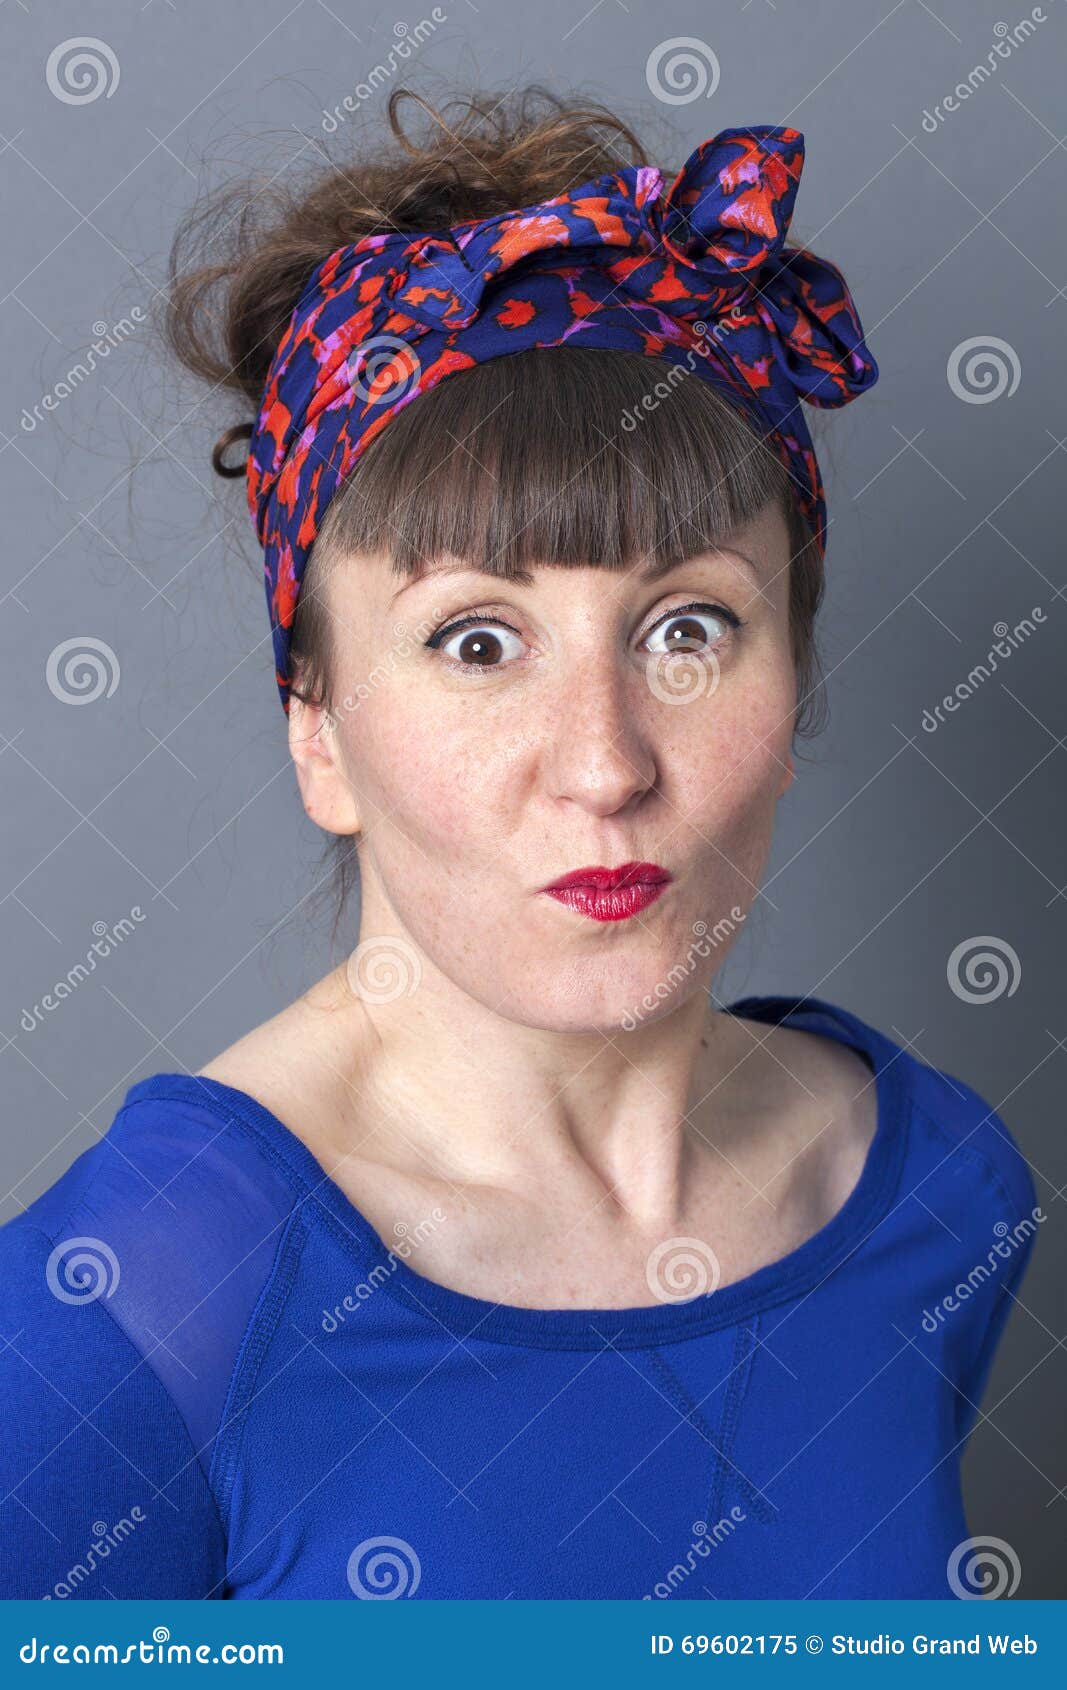 Retro and vintage style. Old fashion. Portrait of lovely pretty young women  in pin up hairstyle with red handkerchief on head. - Stock Image -  Everypixel